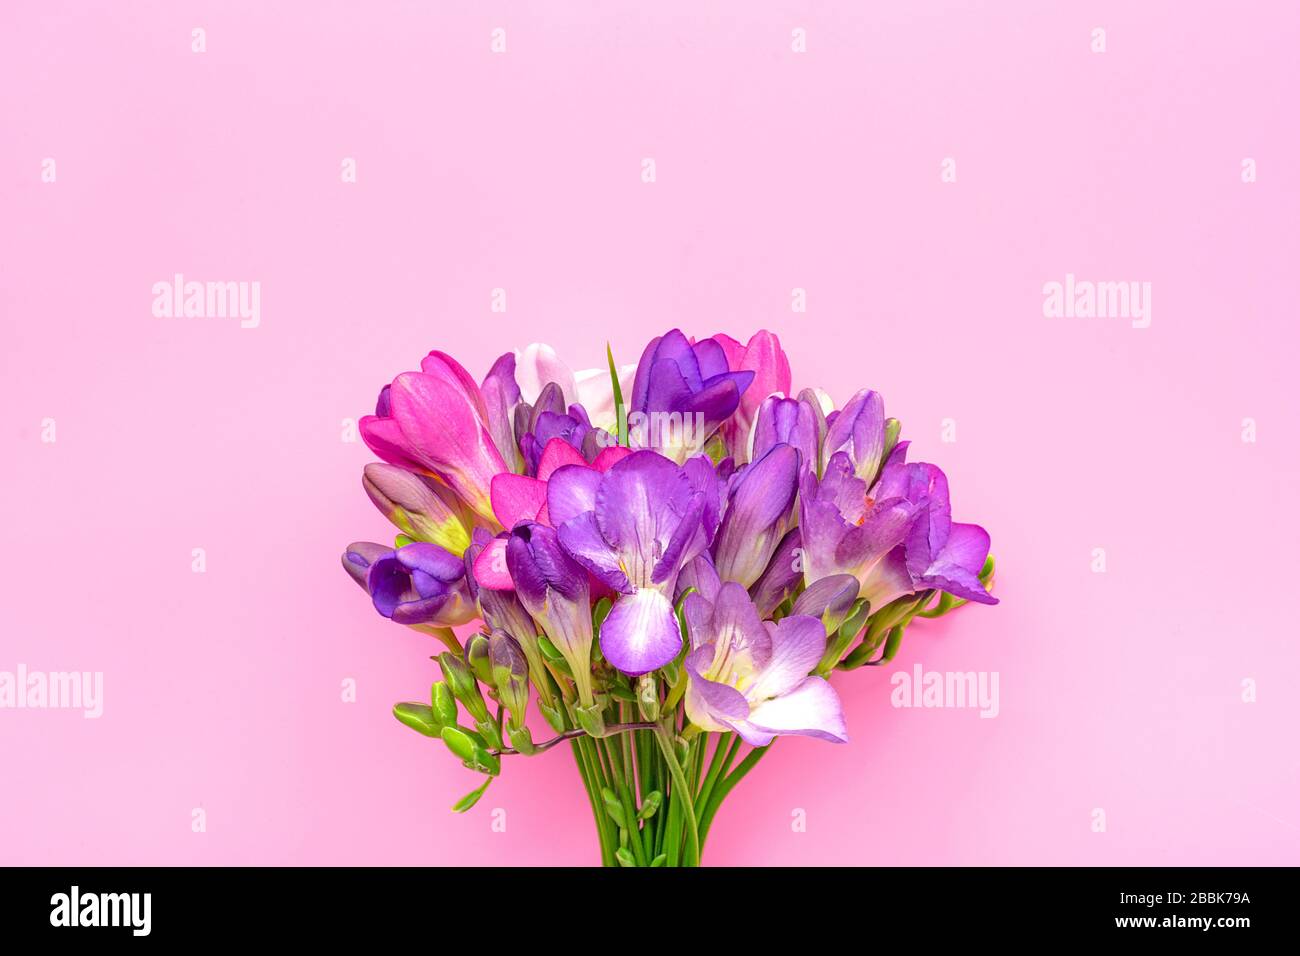 Bouquet of sprig freesia flowers isolated on pink background Floral holiday card Top view Flat lay Stock Photo